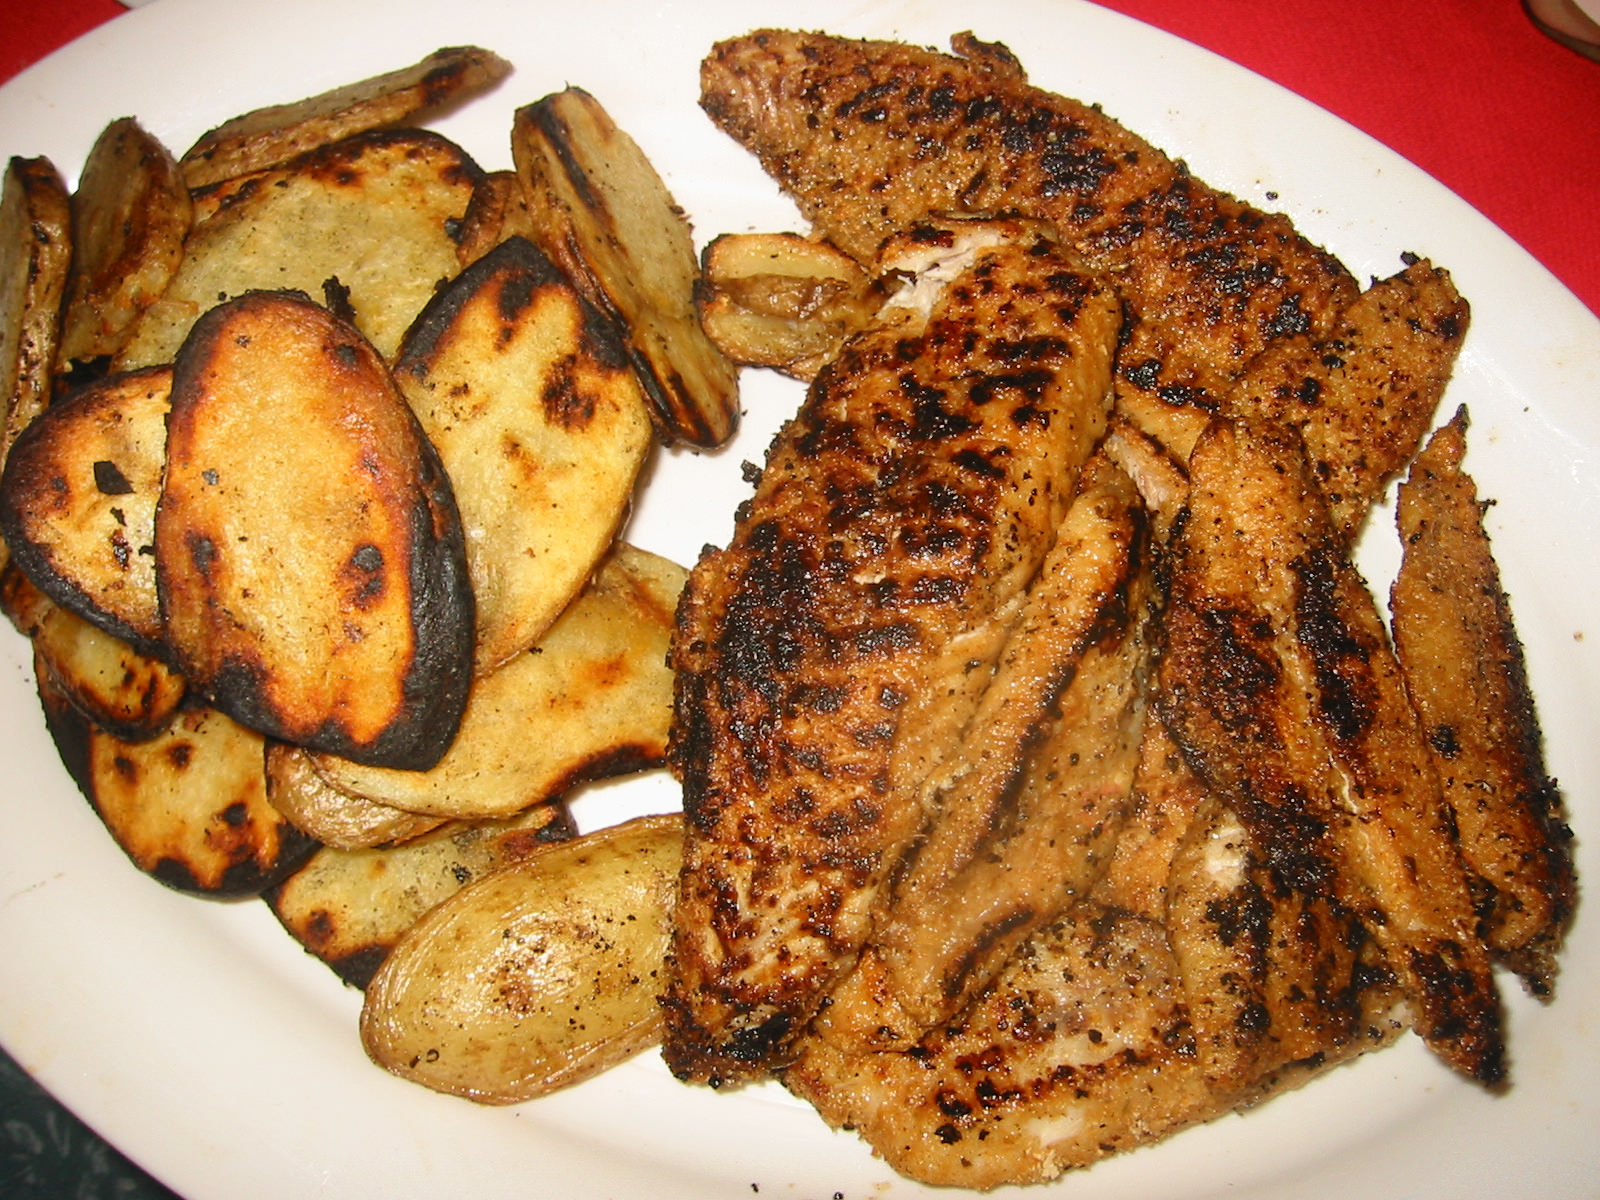 Barbecued potatoes and fish